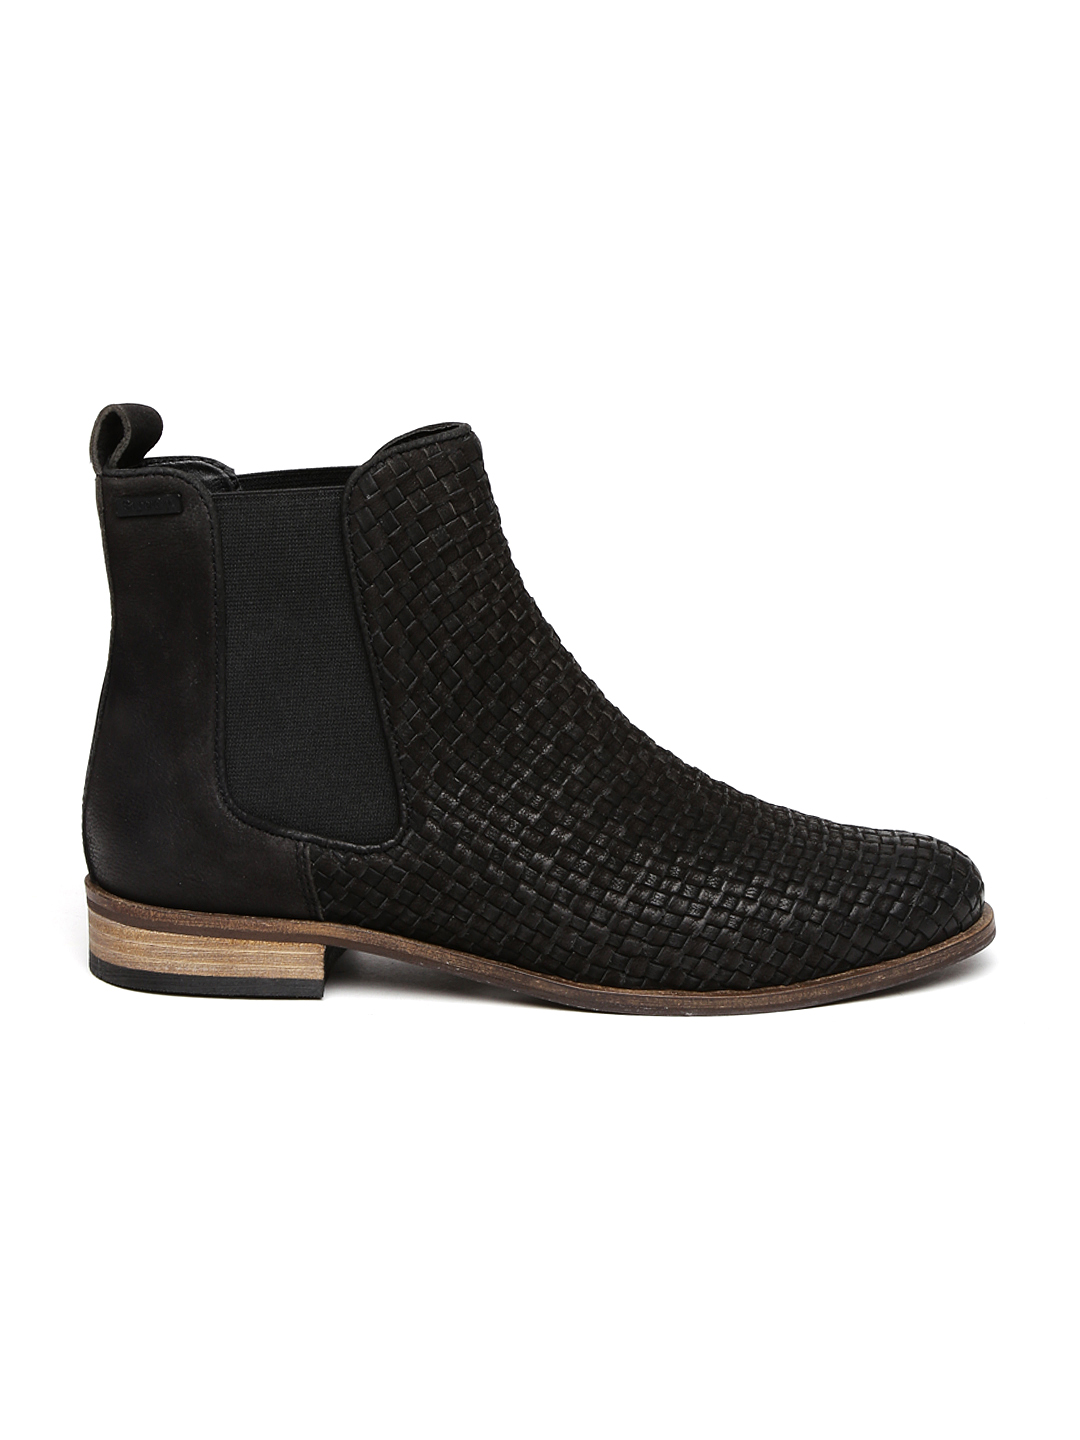 Superdry Women Black Textured Leather Chelsea Boots